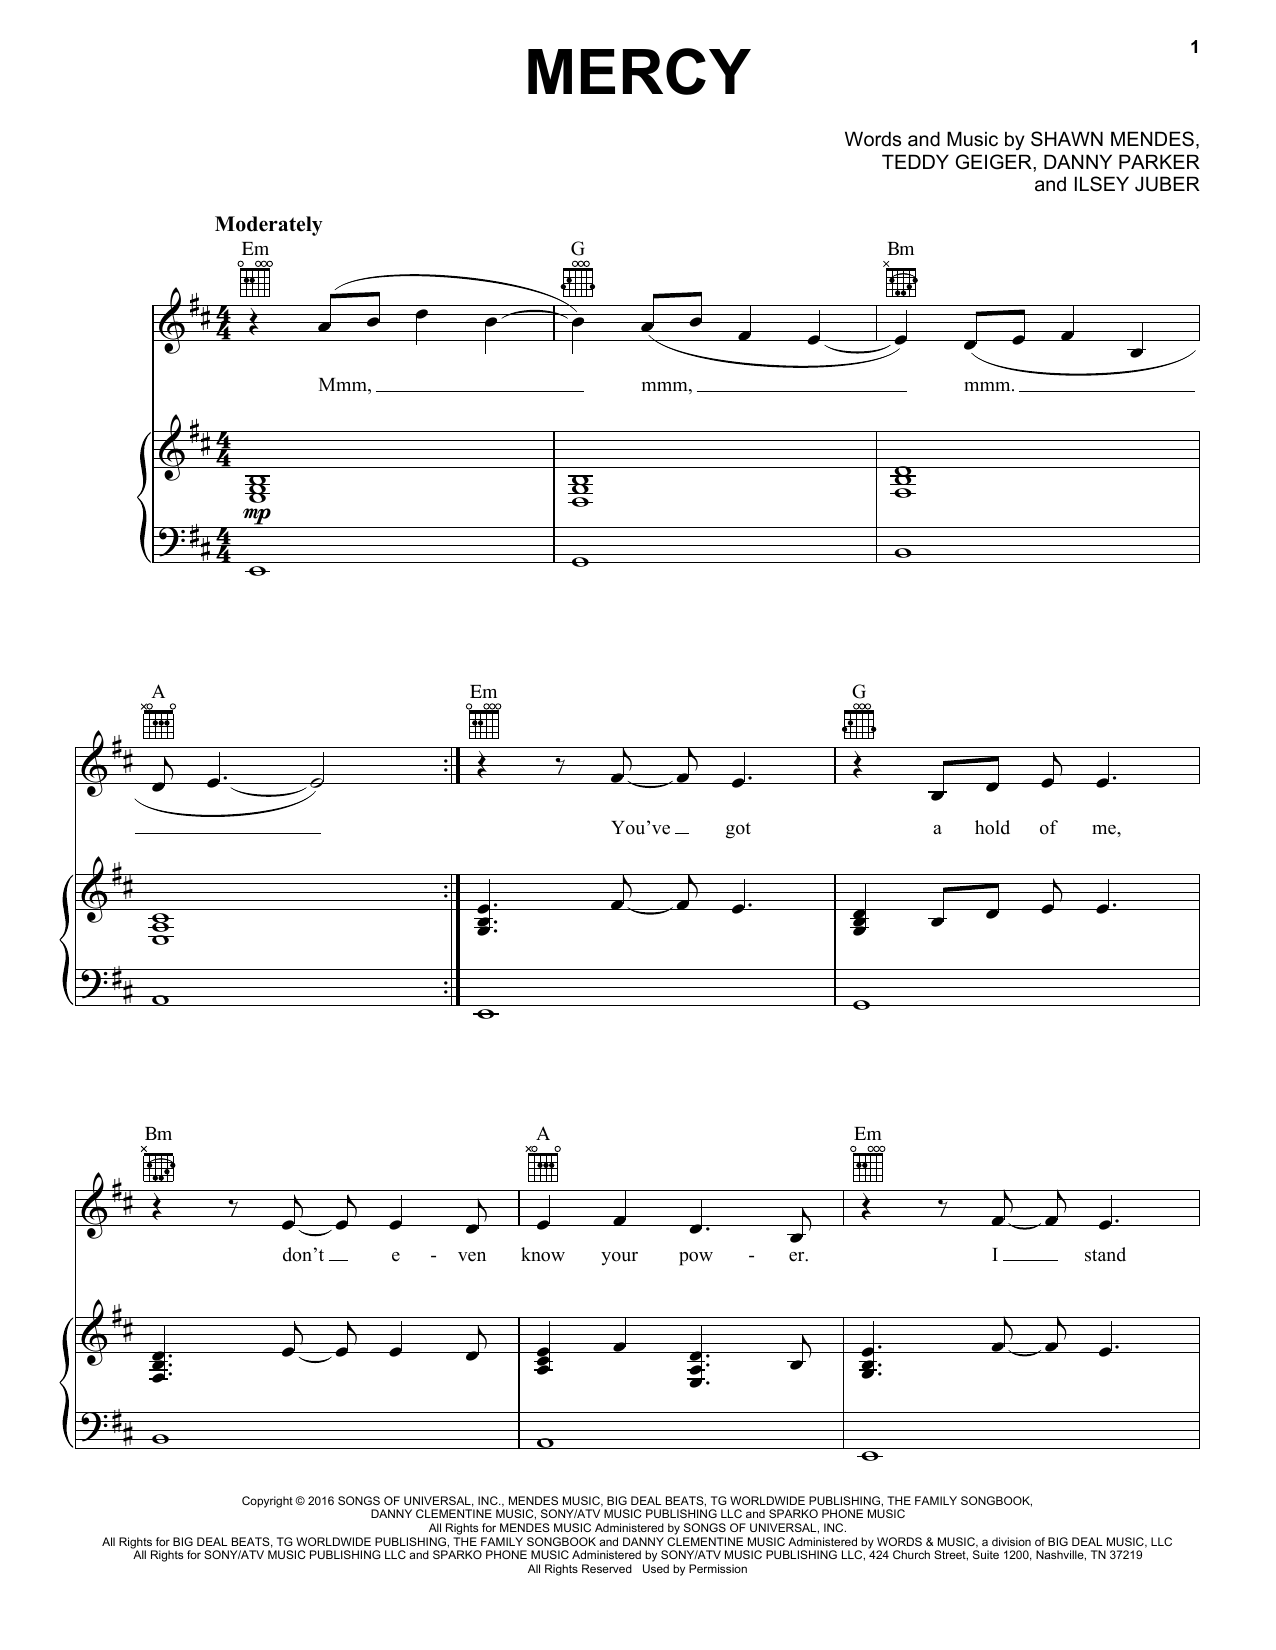 Shawn Mendes "Mercy" Sheet Music Notes, Chords | Piano, Vocal & Guitar